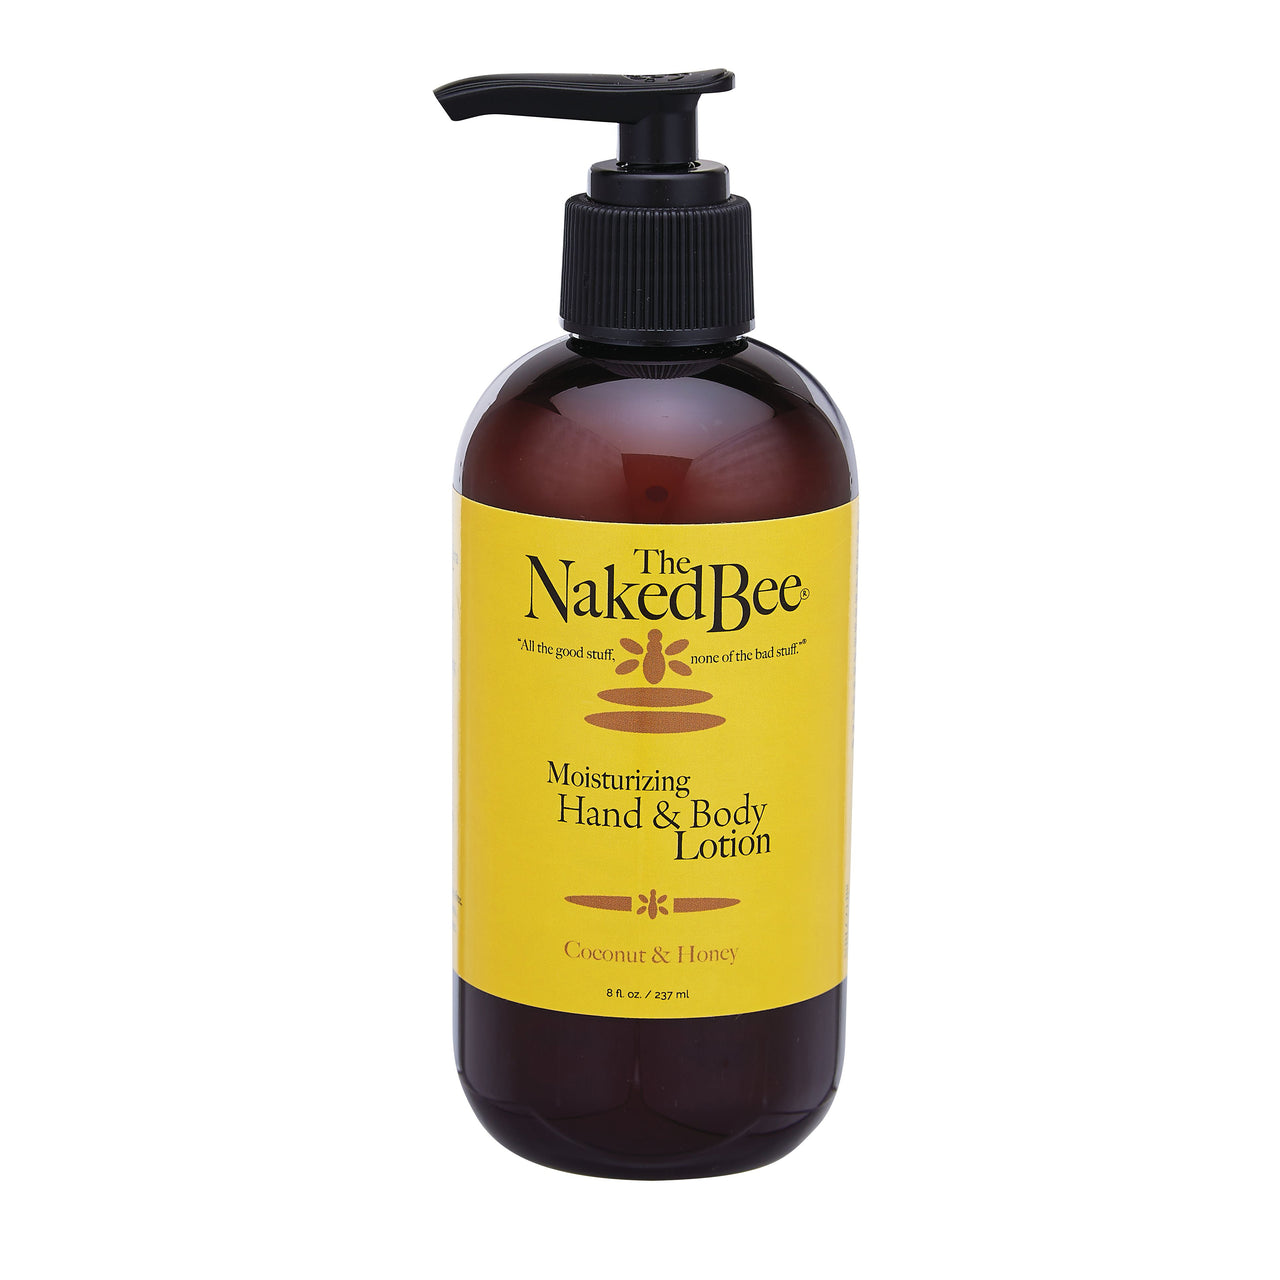 The Naked Bee 8 oz Hand & Body Lotion